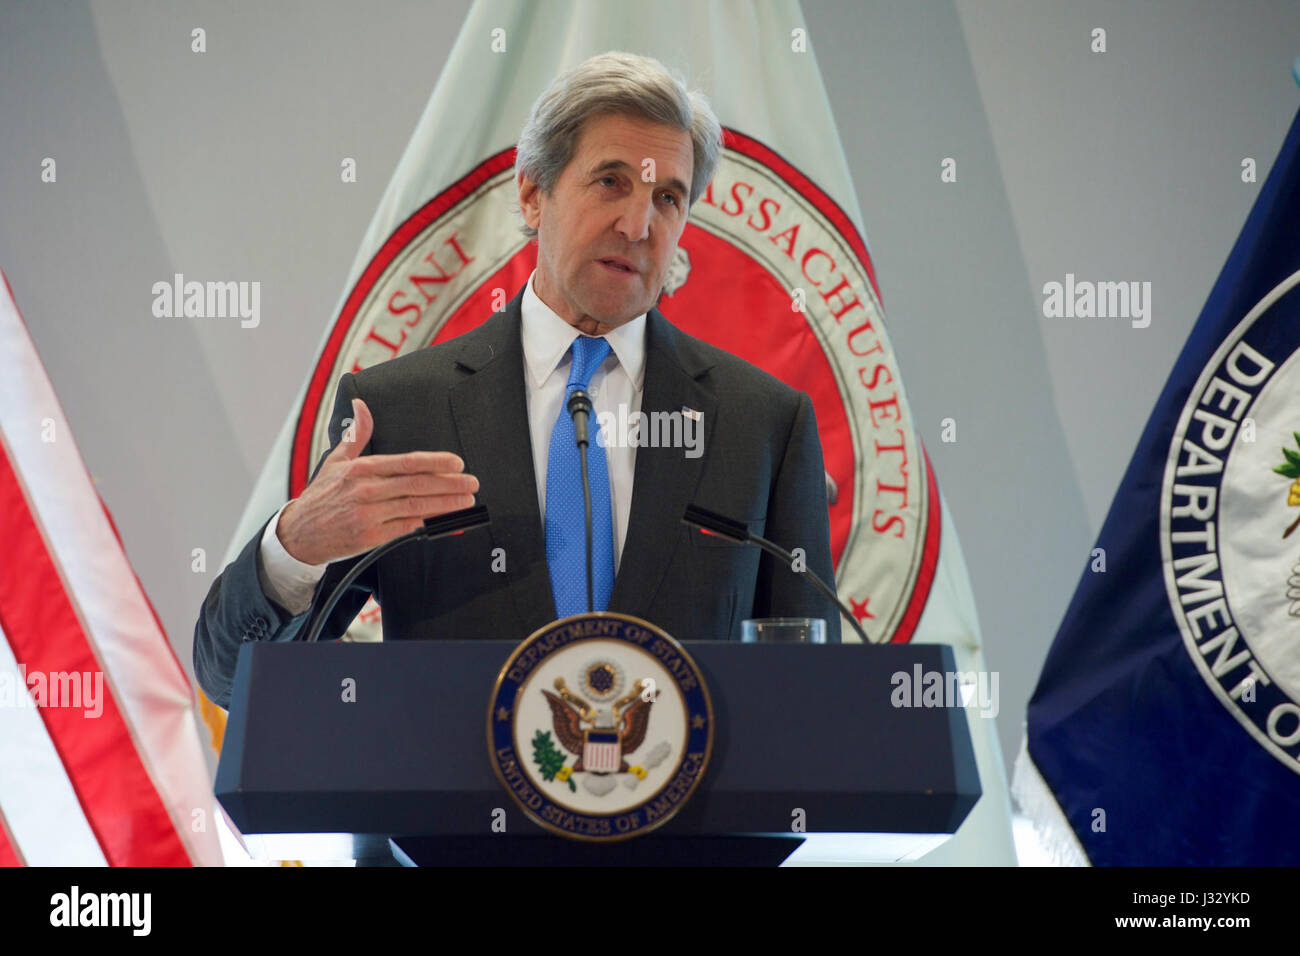 U.S. Secretary of State John Kerry delivers a speech focused on Obama administration climate change policy on January 9, 2016, during an appearance at the Massachusetts Institute of Technology Sloan School of Management in Cambridge, Massachusetts. Stock Photo